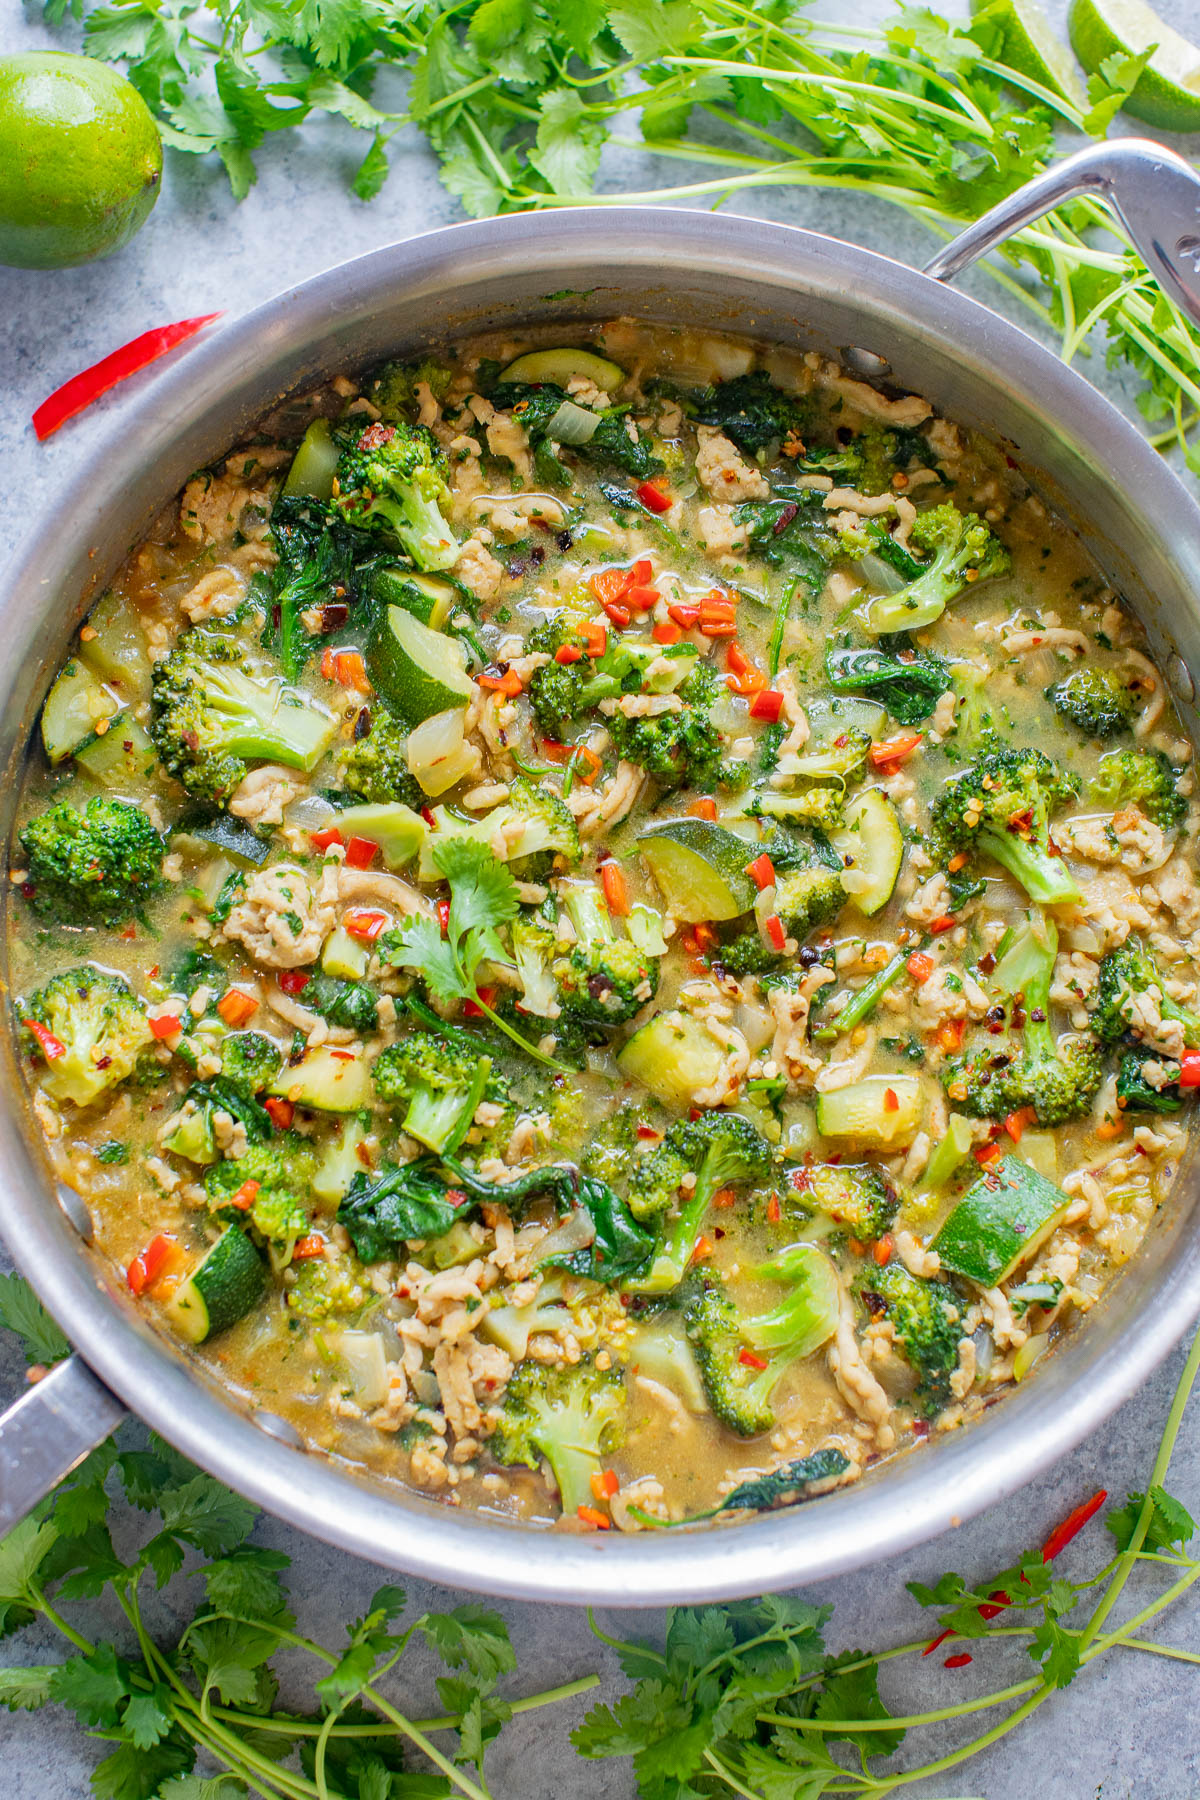 A pot of green curry with broccoli, zucchini, and red peppers.